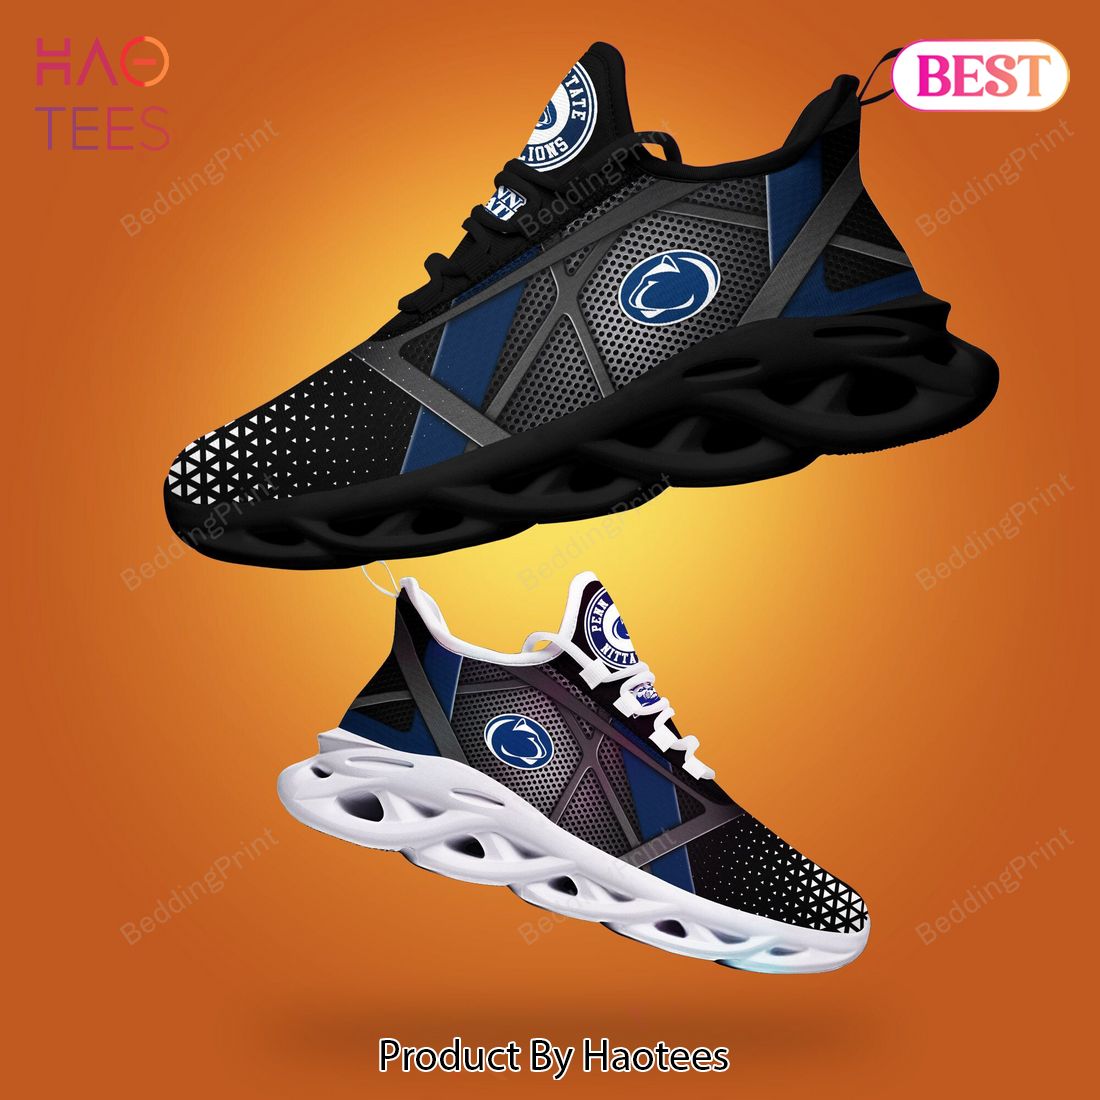 Penn State Nittany Lions NCAA Hot Trend Black Blue Max Soul Shoes